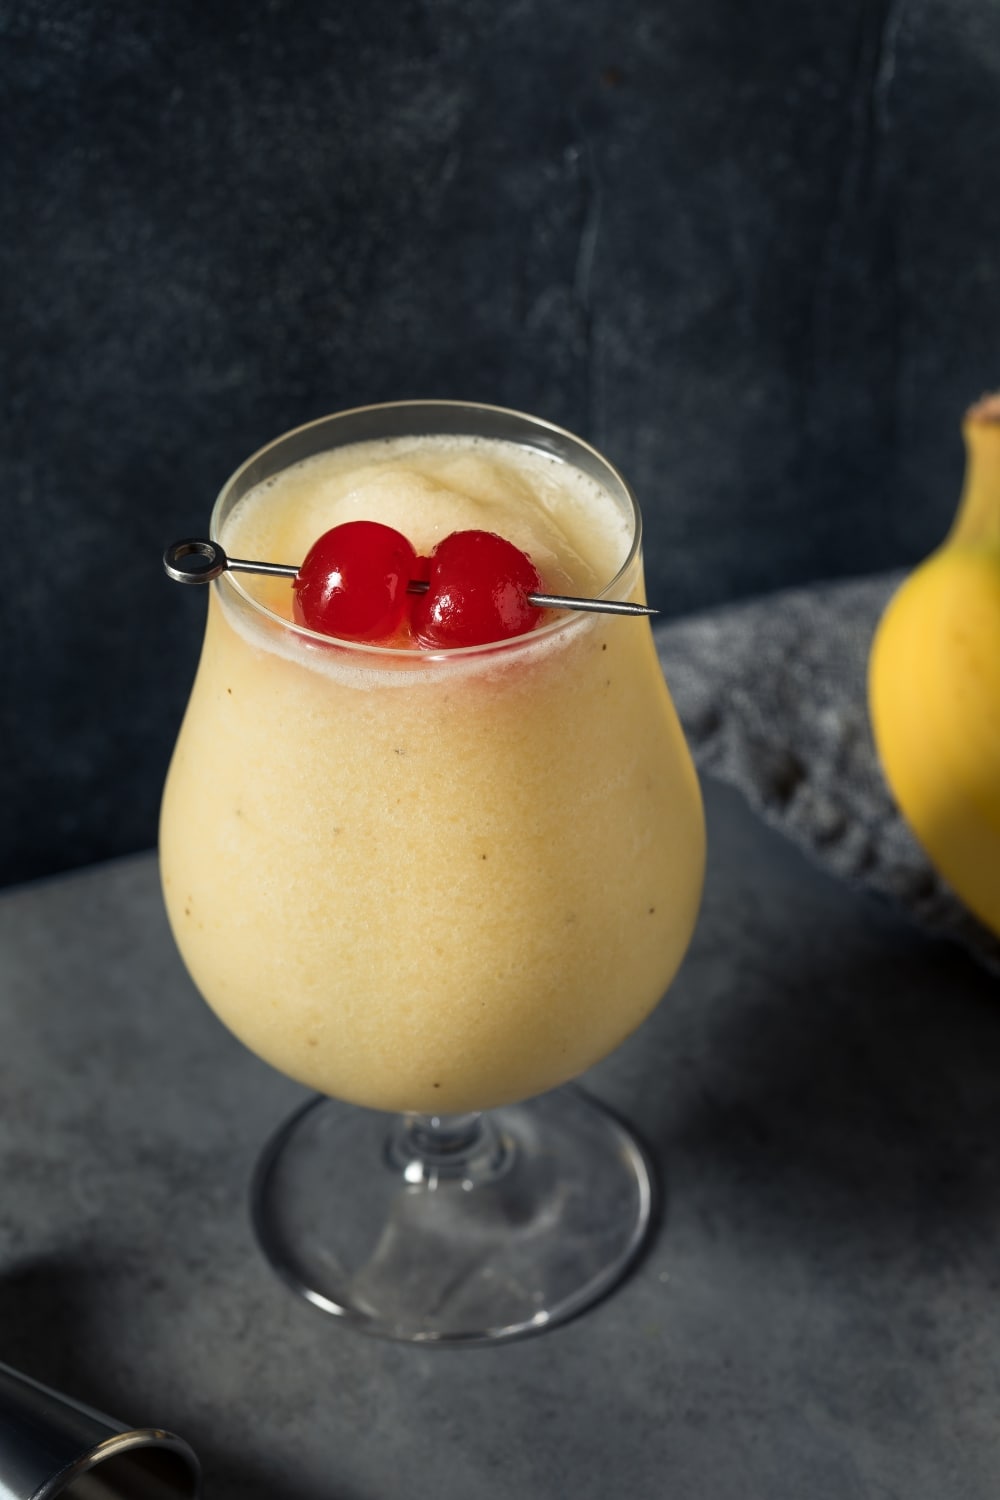  Banana Daiquiri in a Tulip Glass with a Jigger and Banana on the Side, Garnished With Cherries